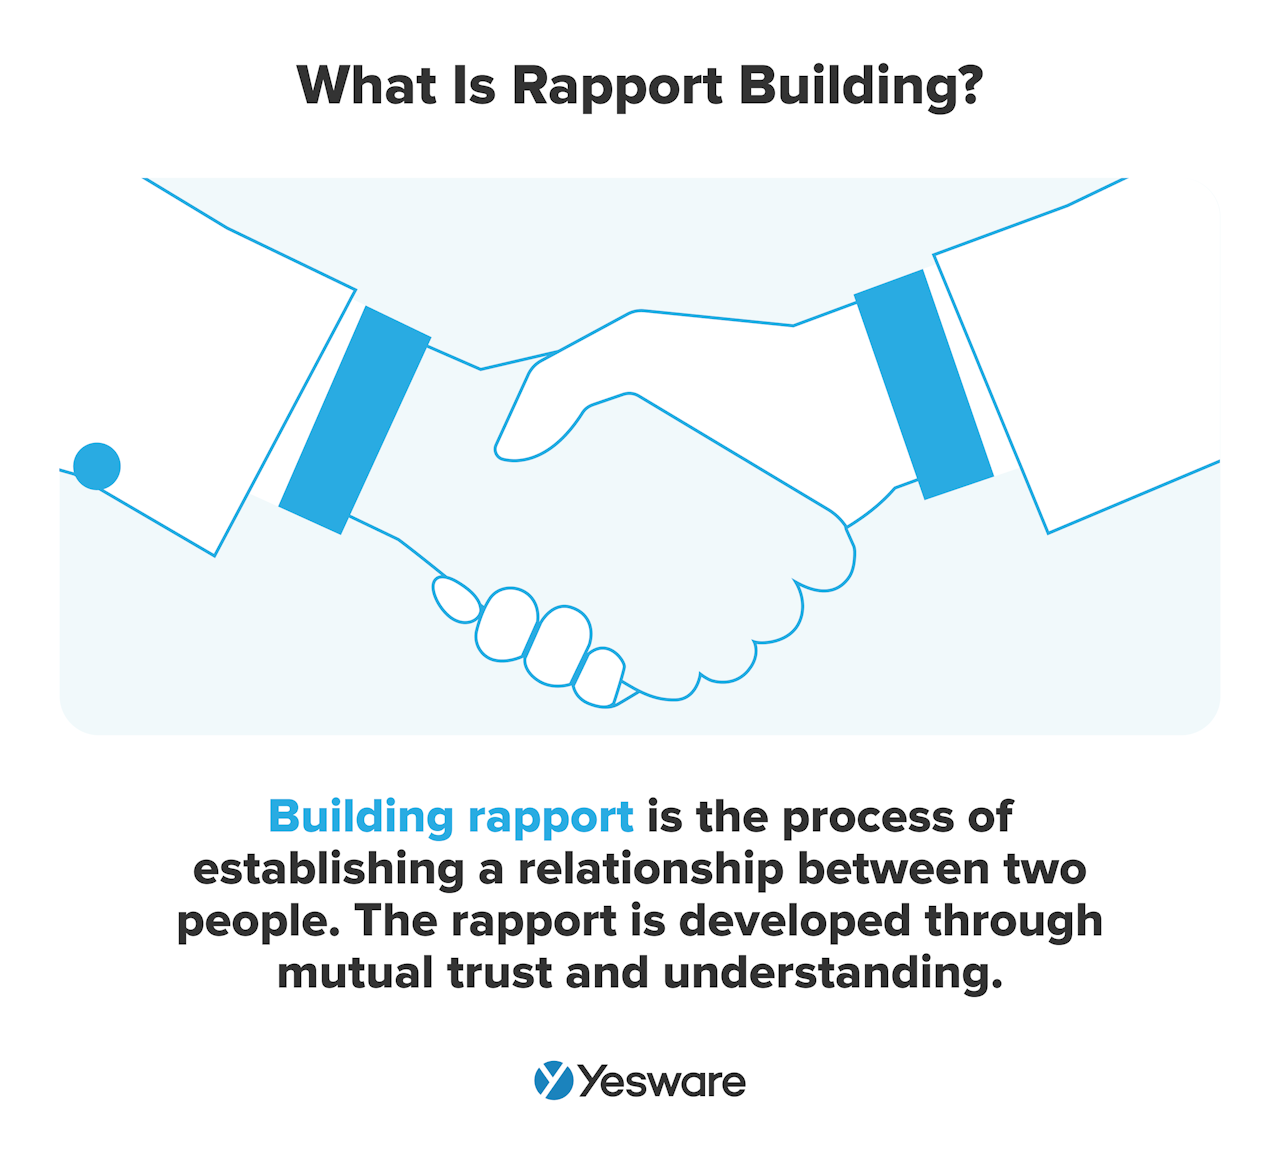 what is rapport building?